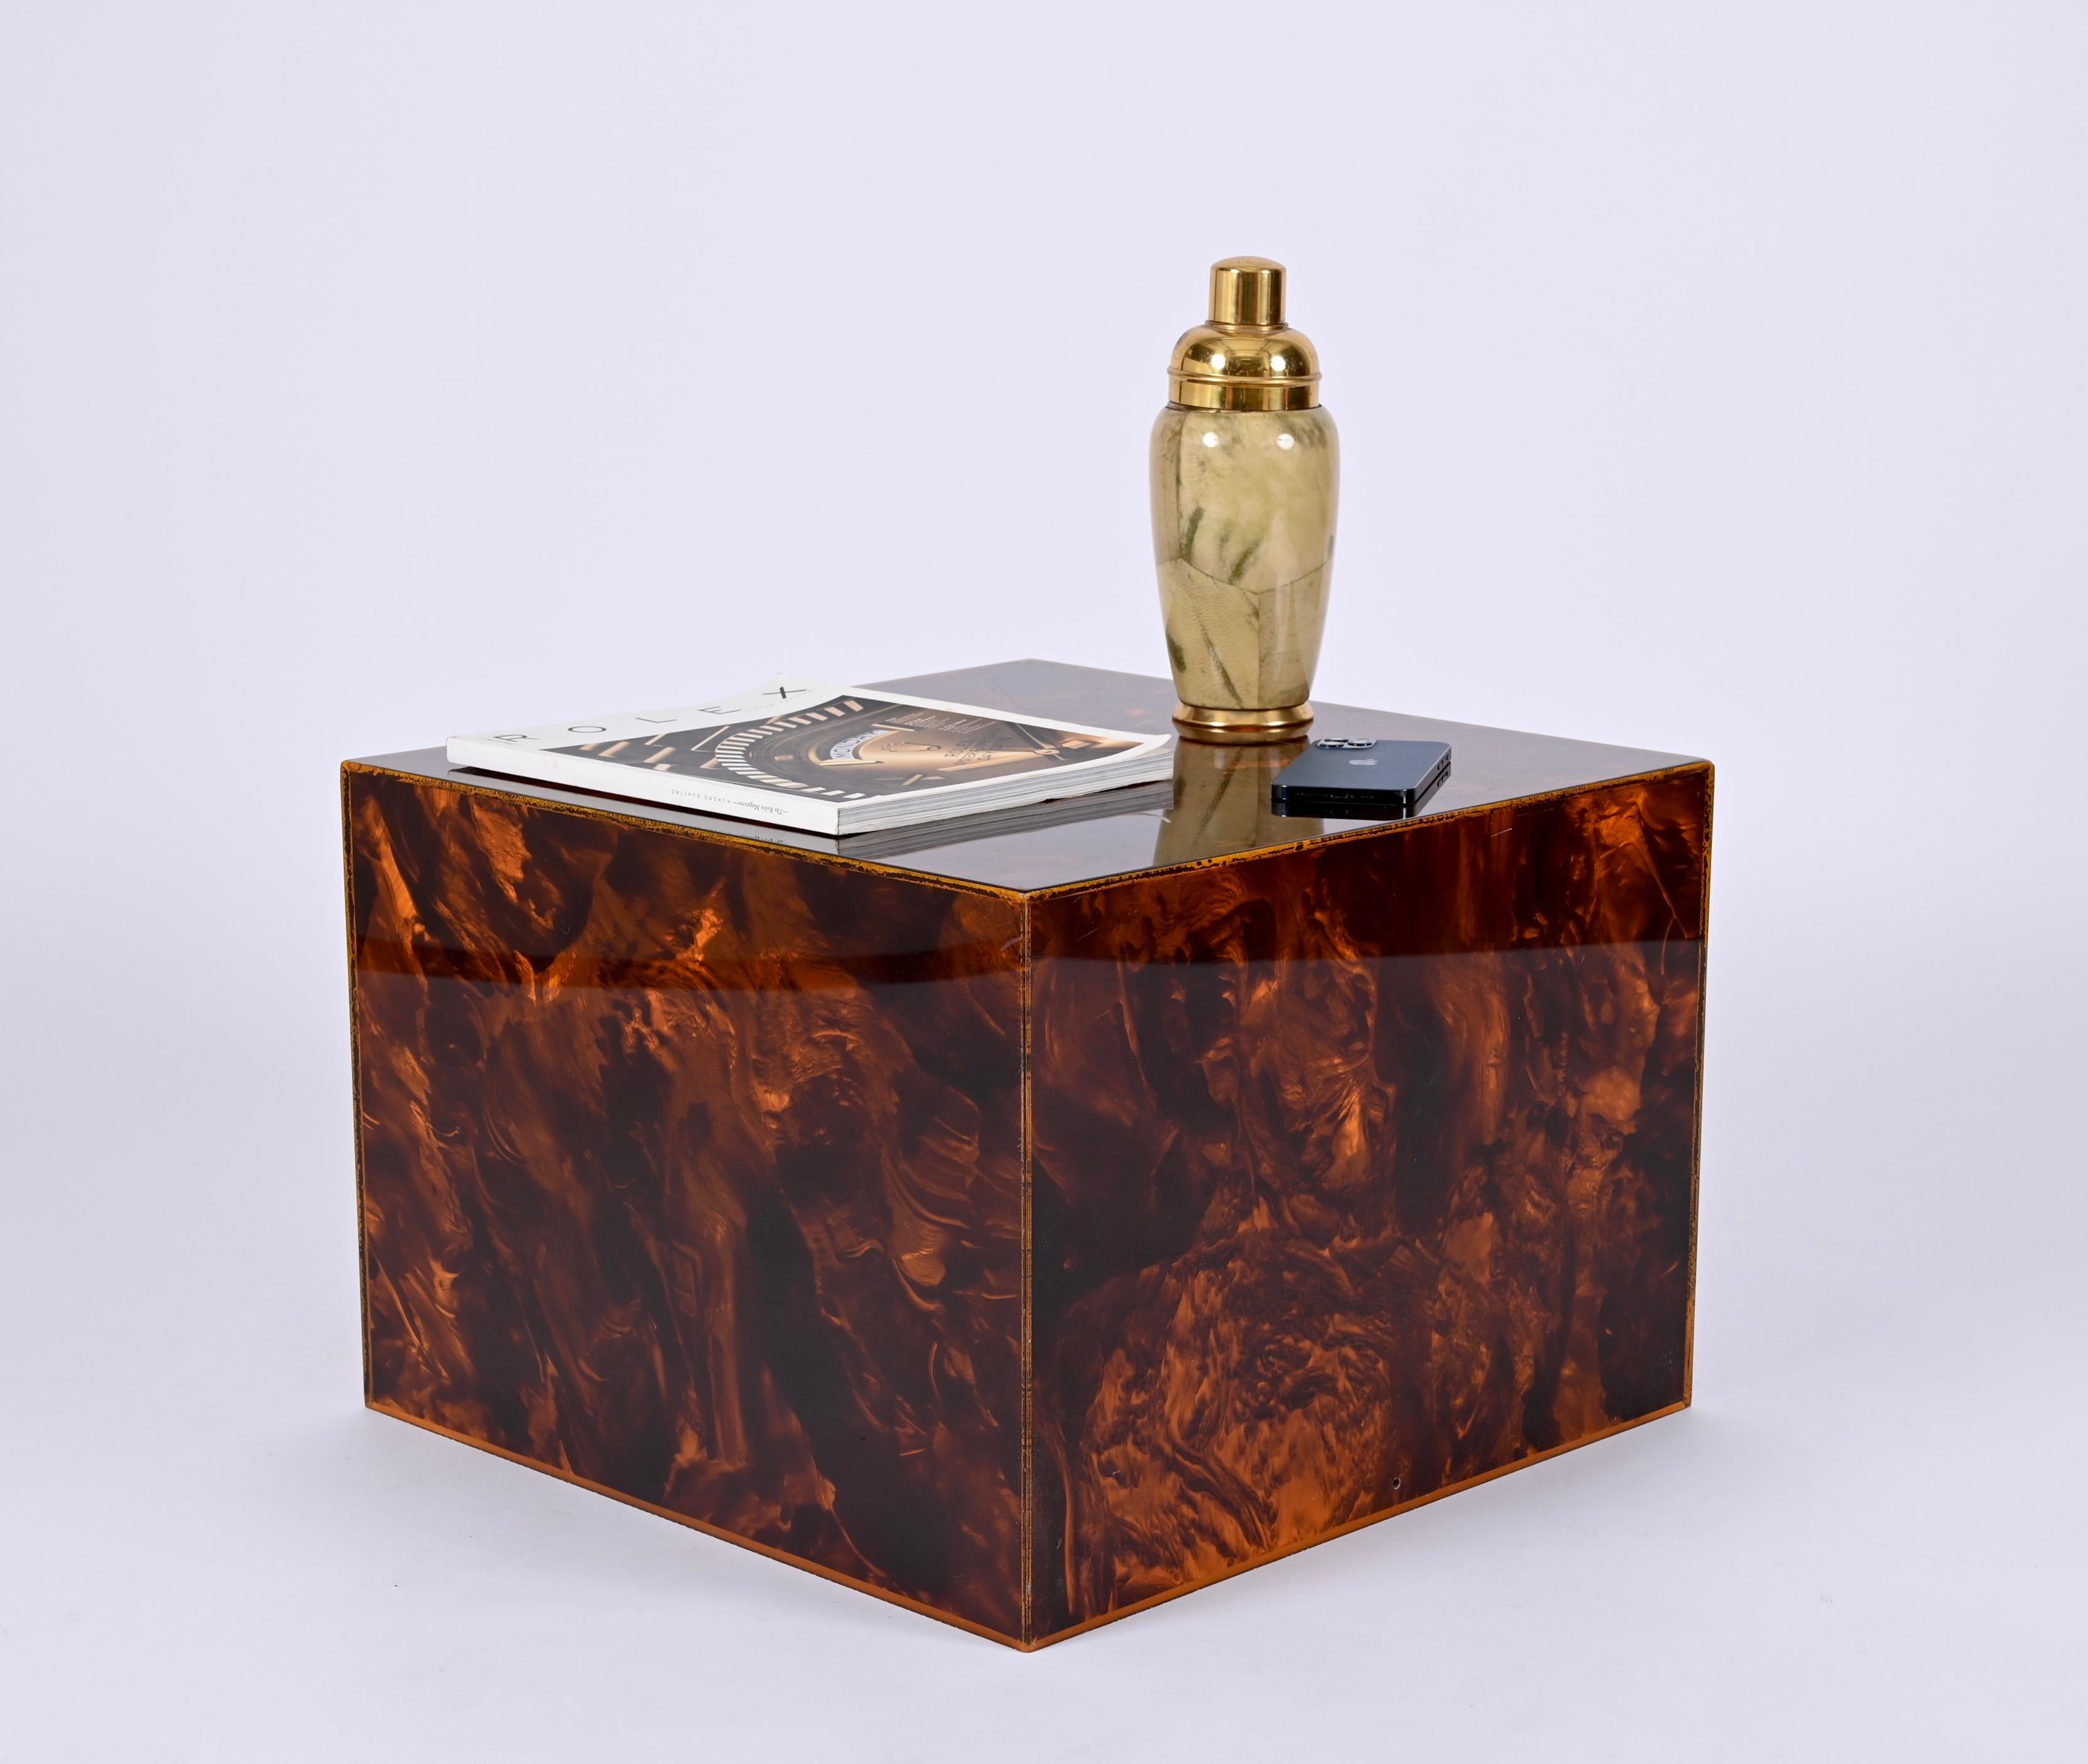 Late 20th Century Italian Coffee Table or Stool in Tortoiseshell Lucite, Willy Rizzo, 1970s